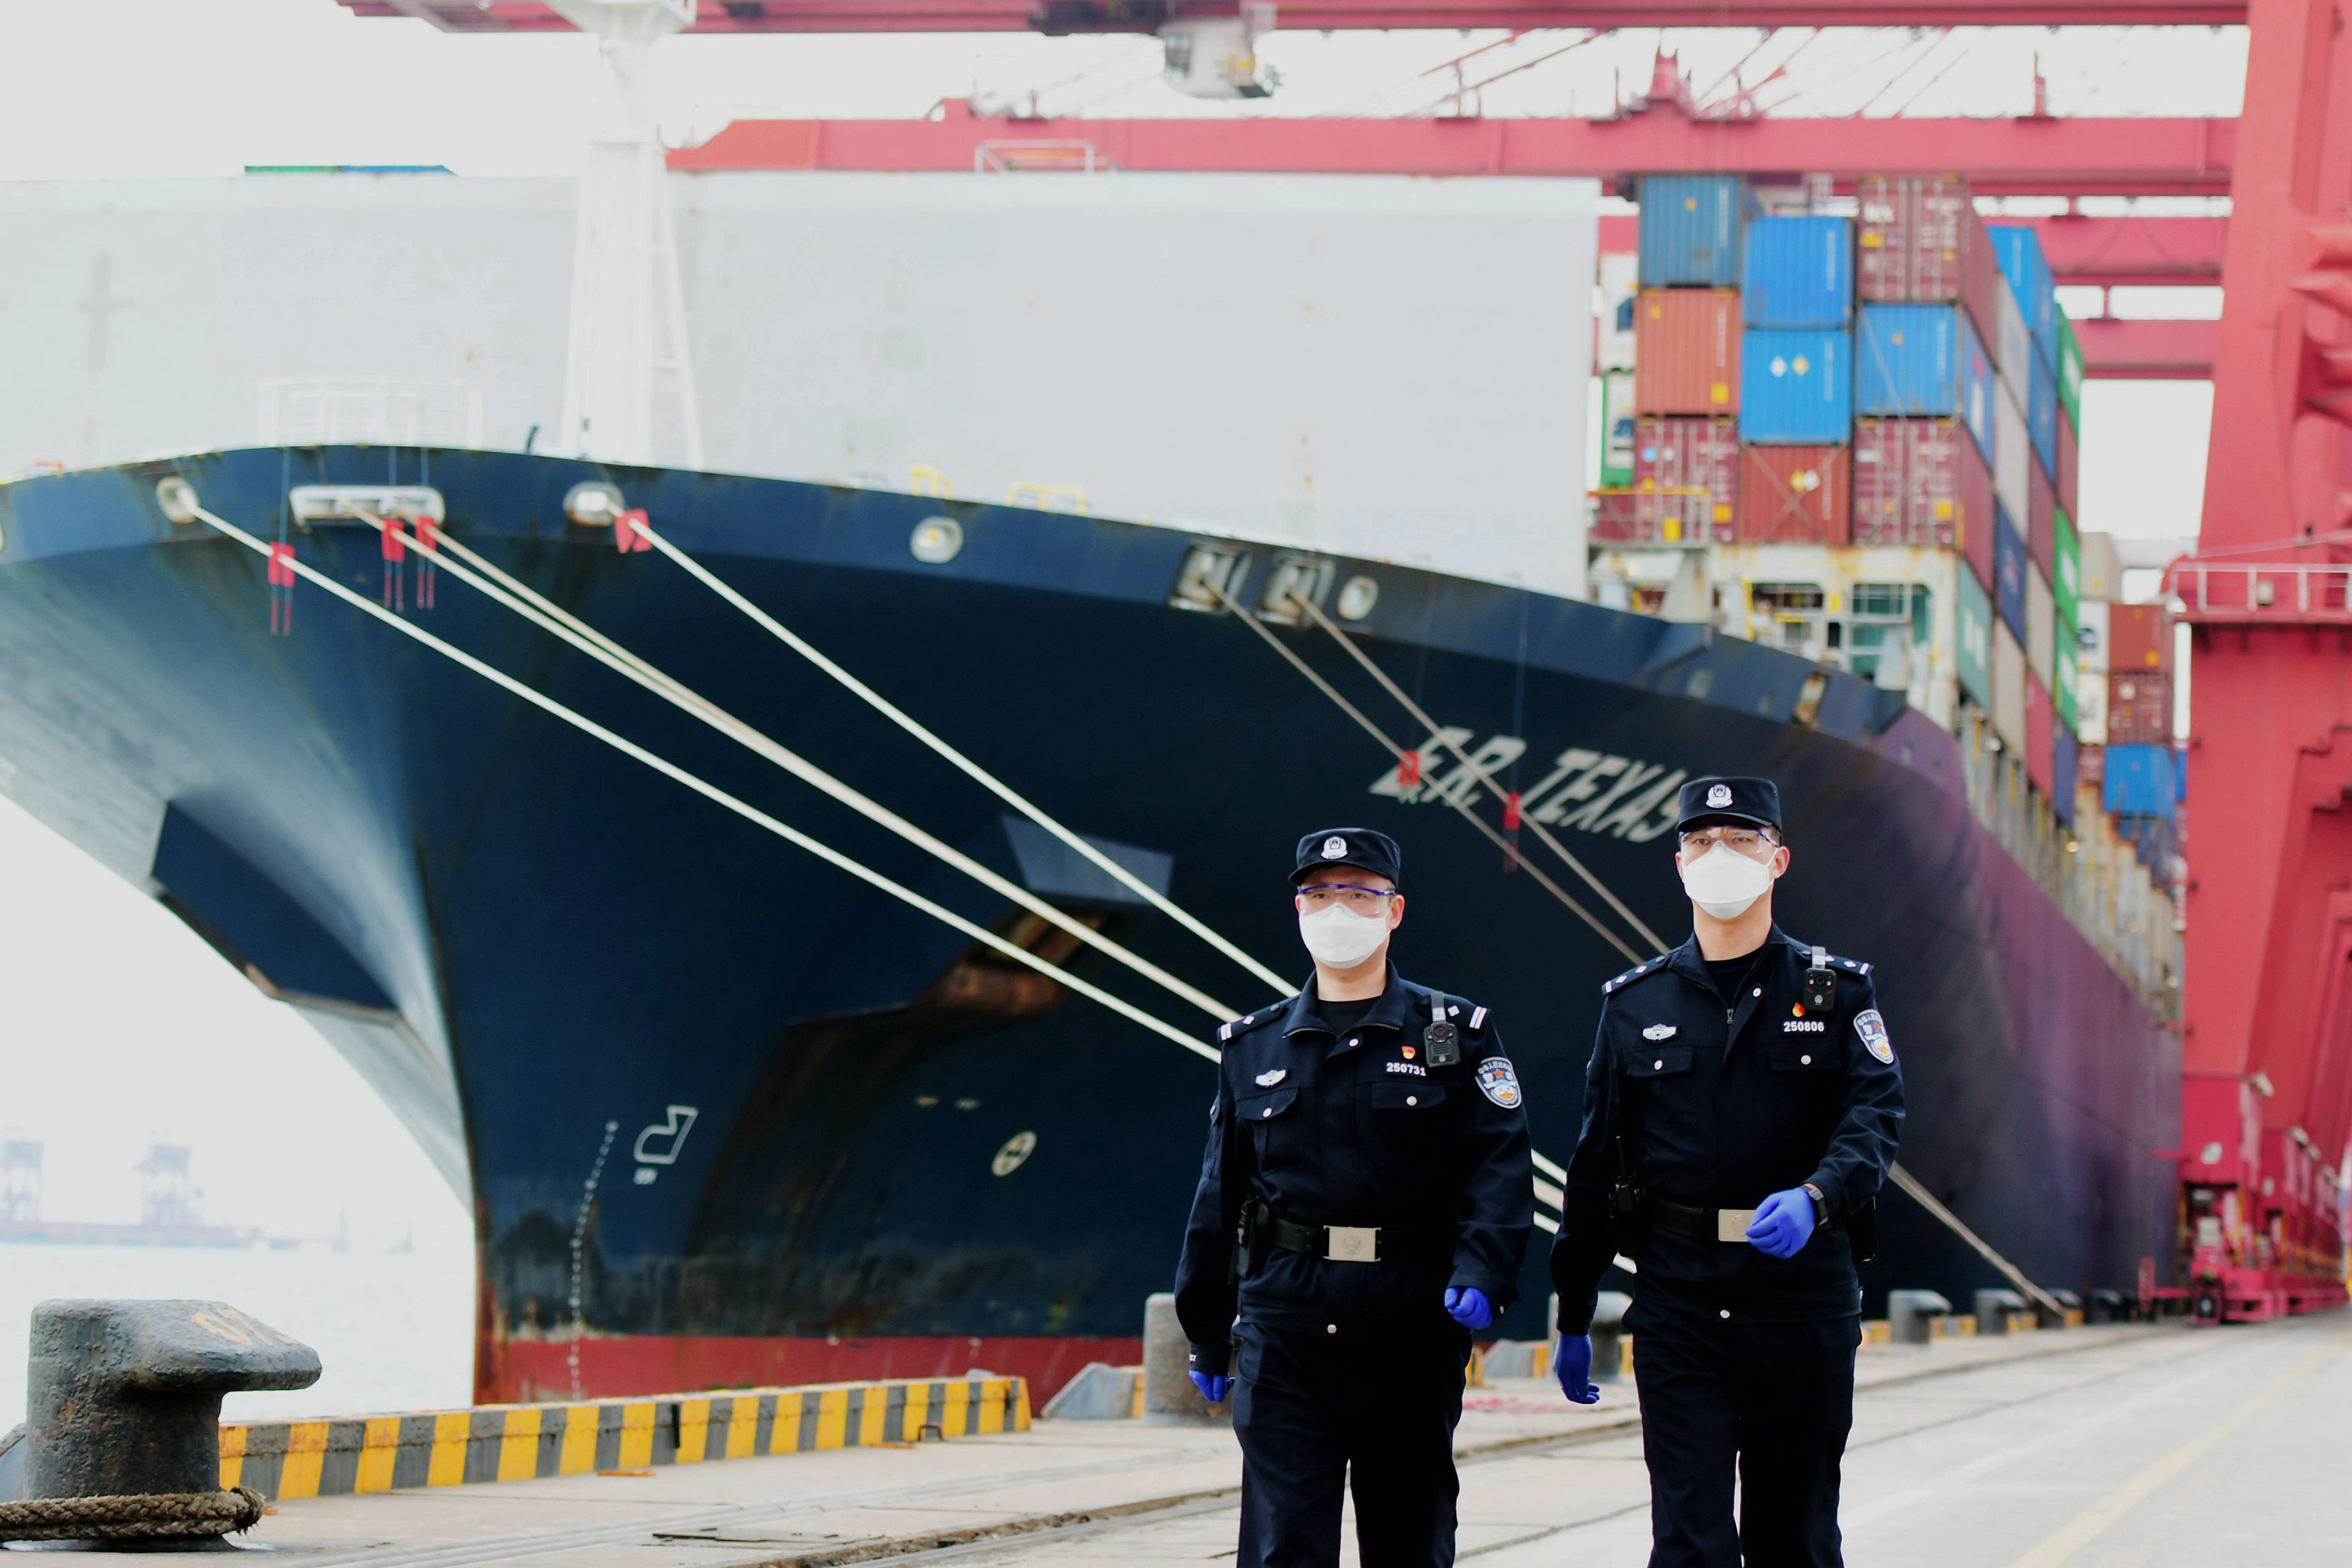 Police patrol a foreign trade container terminal at the port of Qingdao in Shandong Province, China, on March 13.